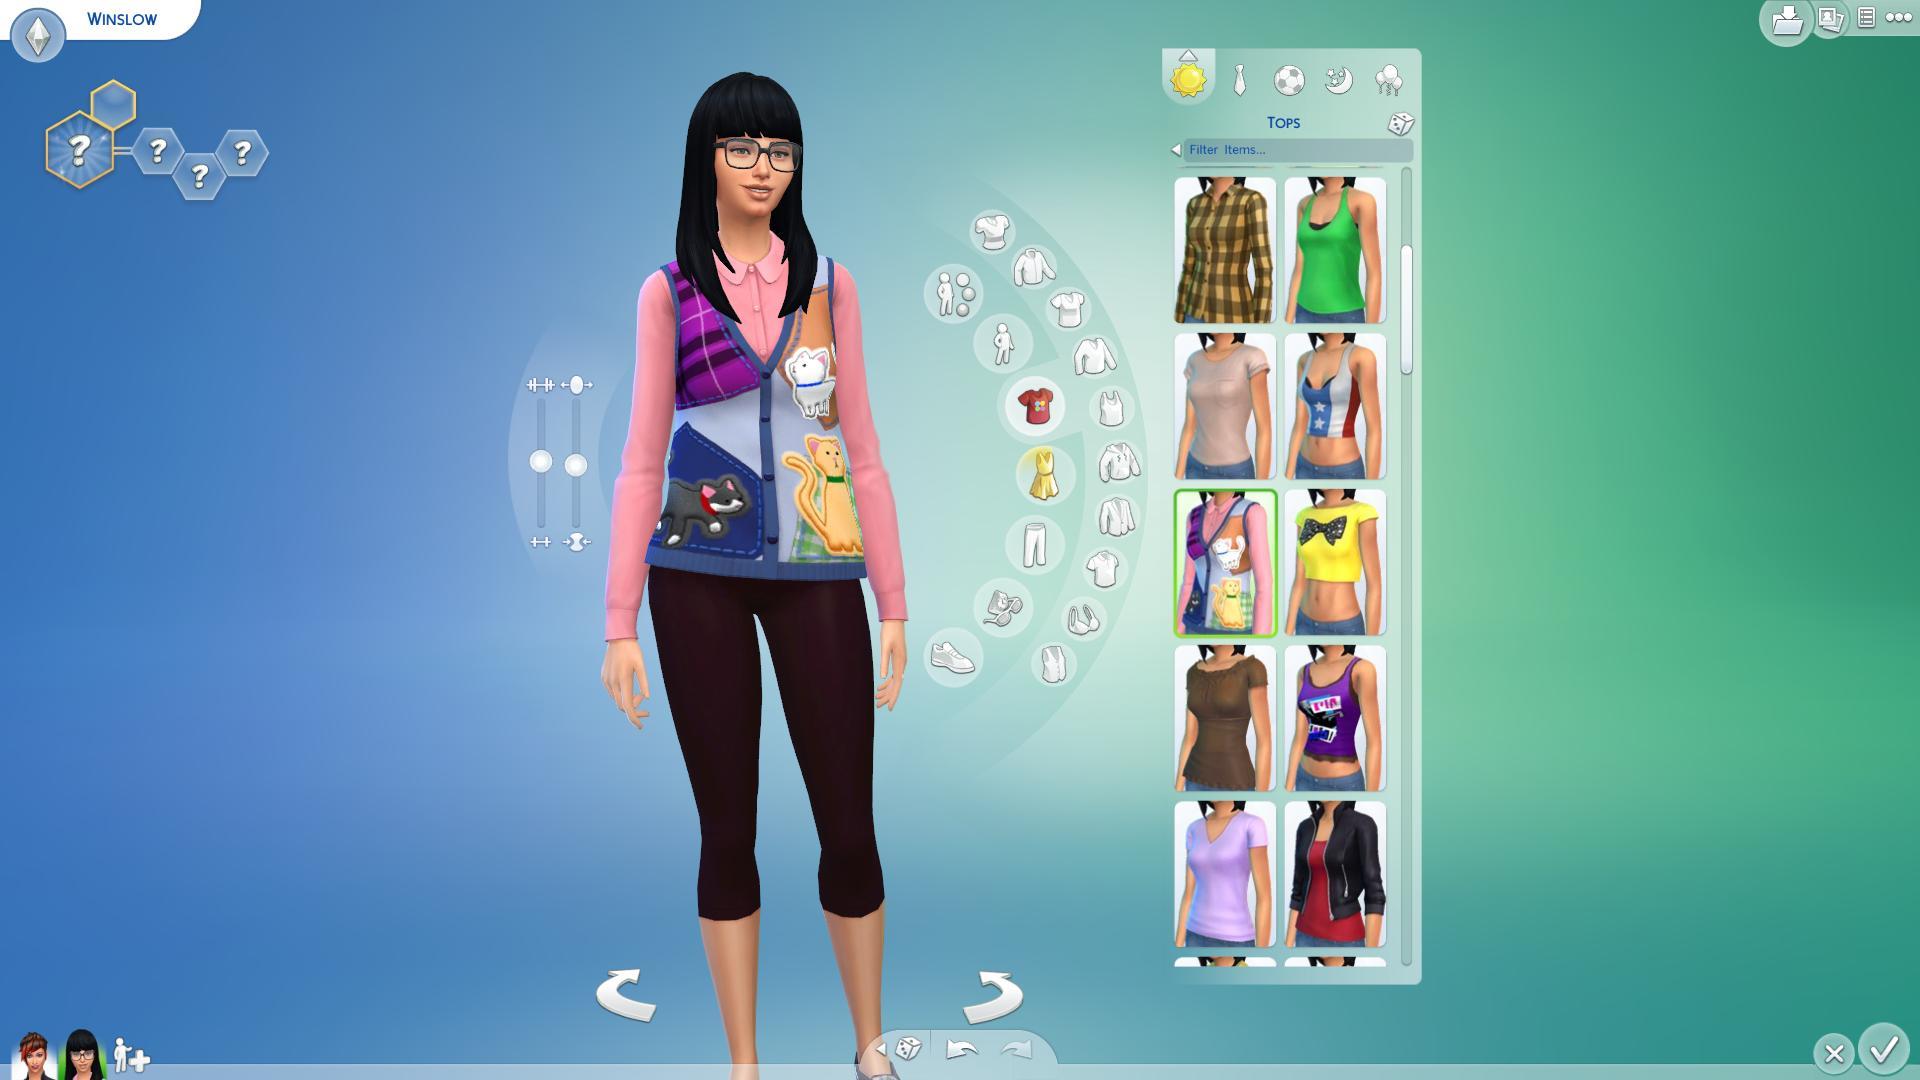 sims 4 apk download android no verification